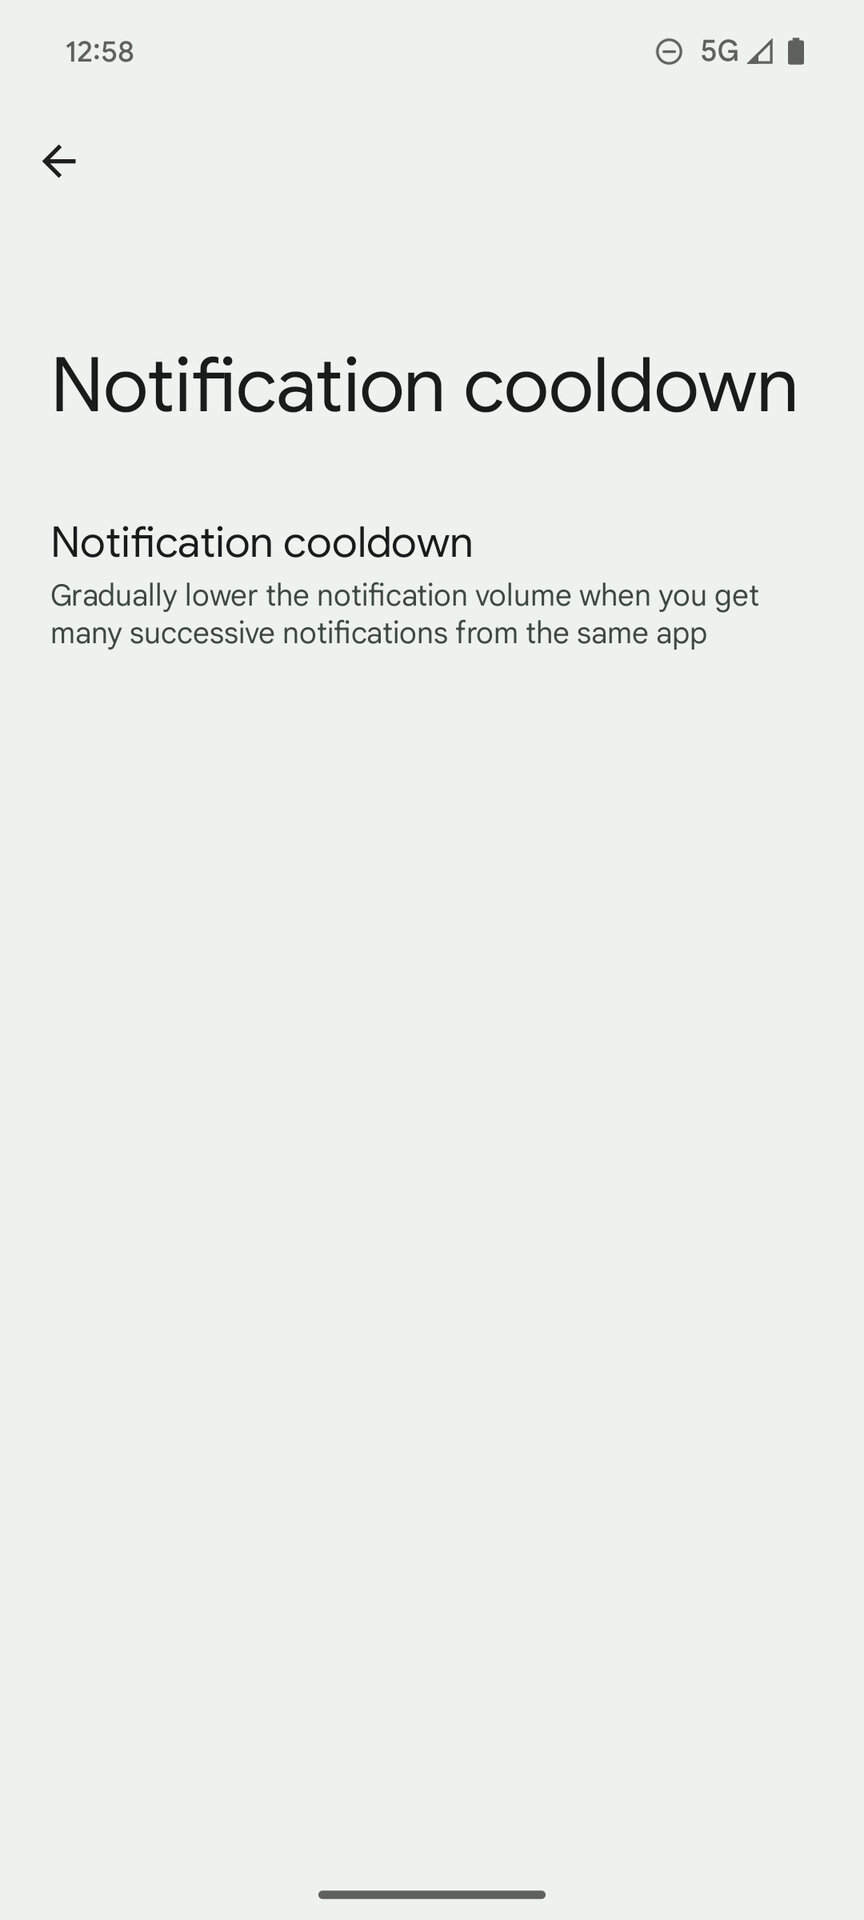 Notification cooldown page